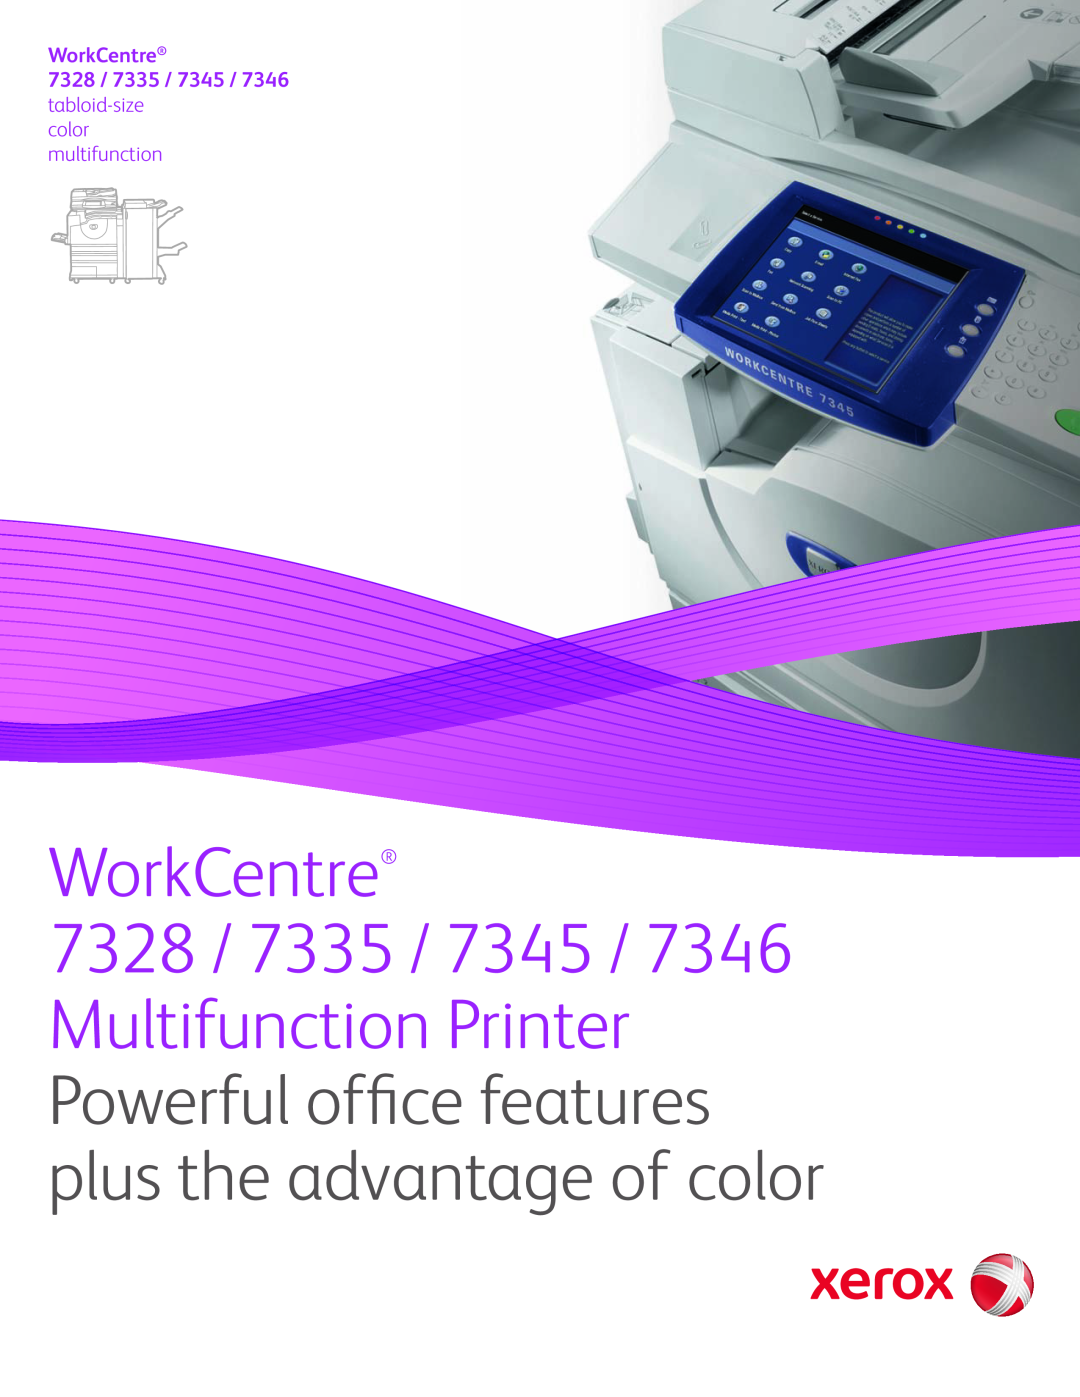 Xerox TV2802UK manual WorkCentre 7328 / 7335 / 7345 / 7346 tabloid-size, color multifunction 